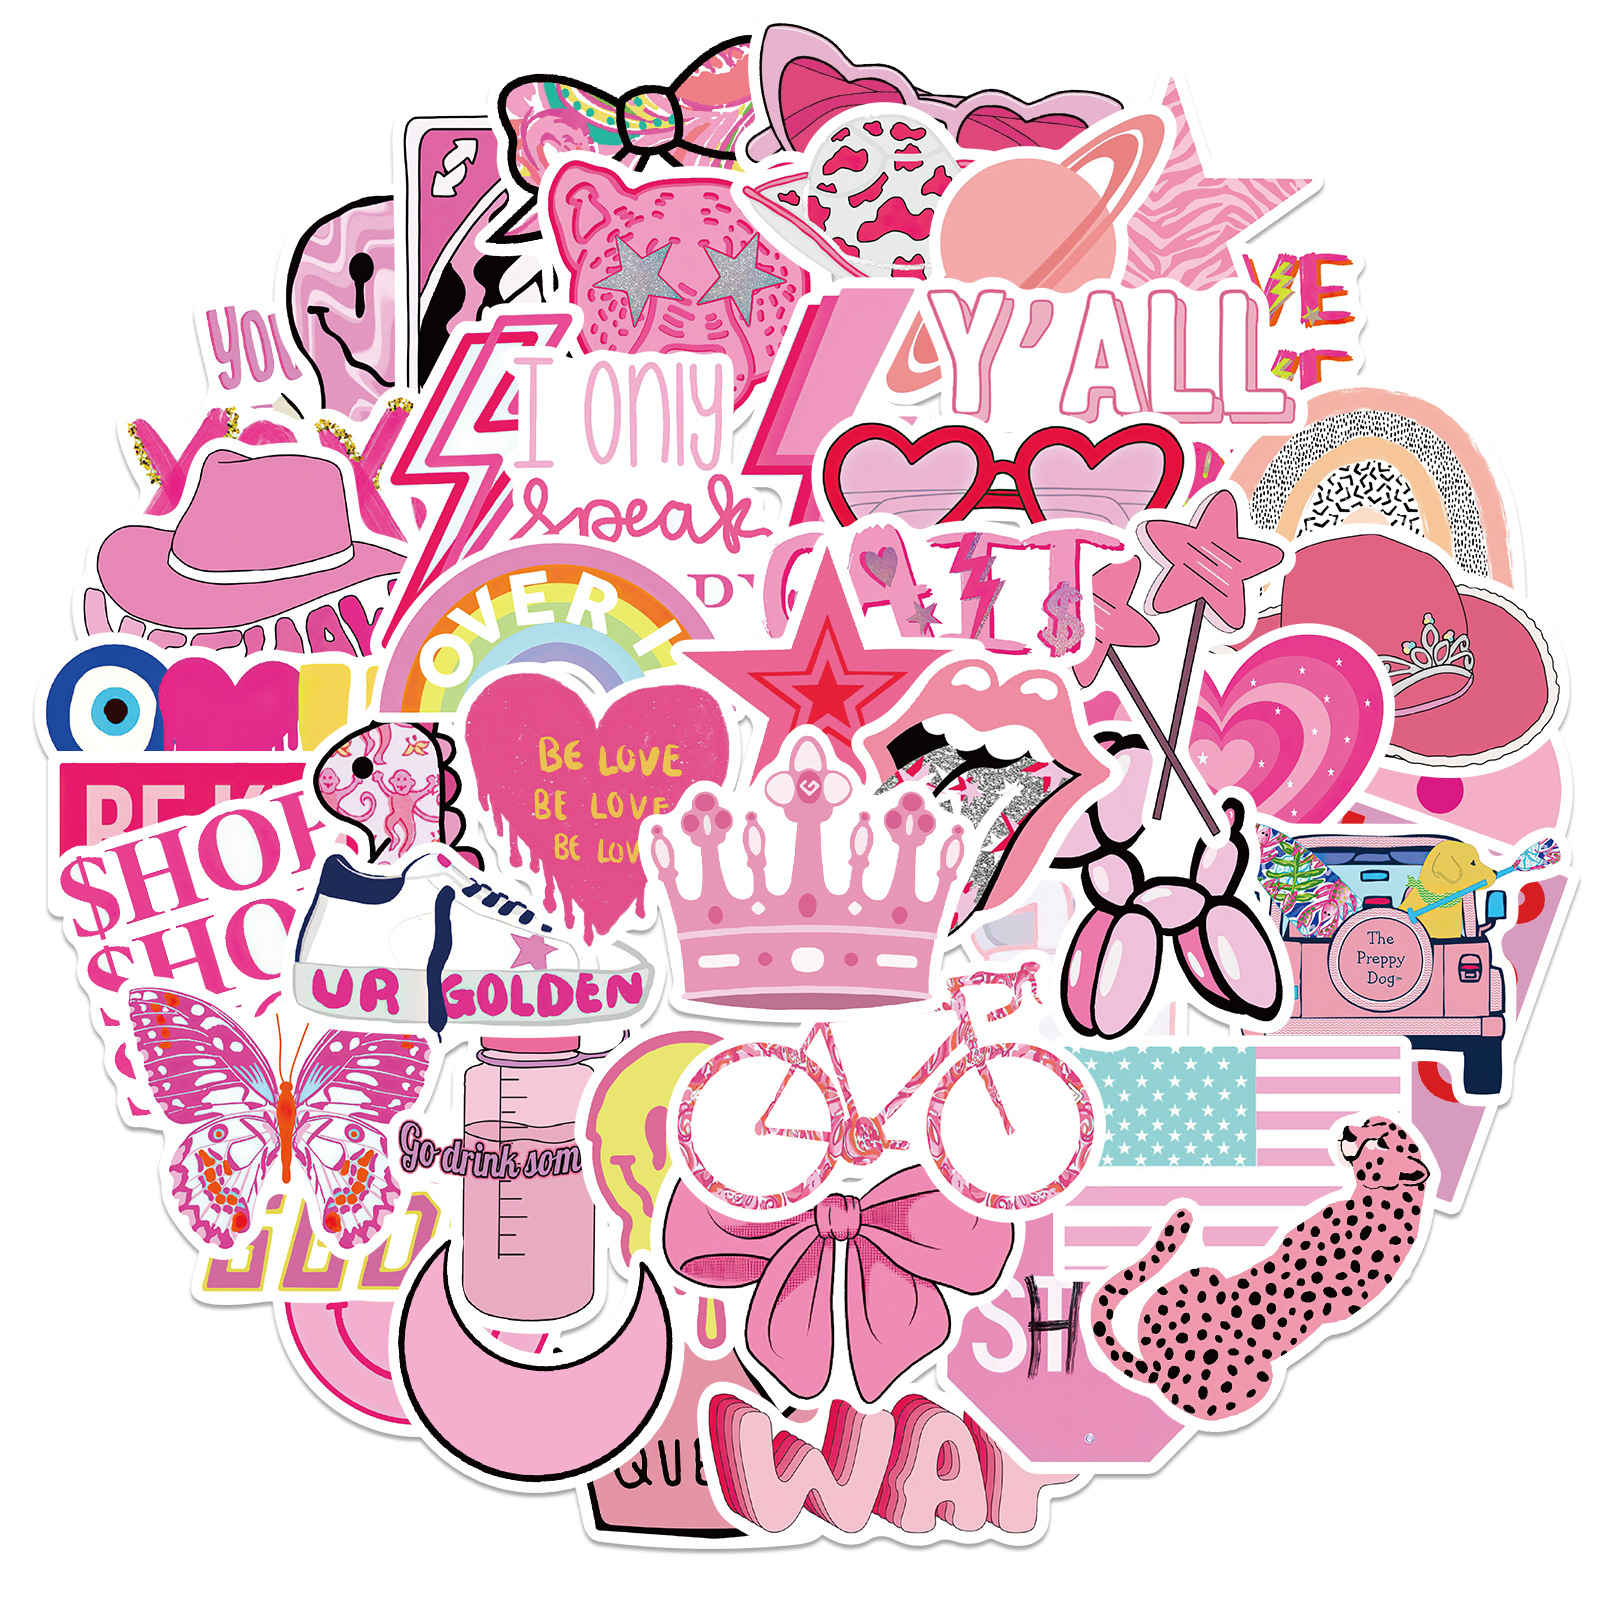 Cute Pink Stickers Aesthetic Trendy Car Sticker Laptop Water Bottle Phone Pad Guitar Bike Luggage Decals for Kids Girls Teens Gifts